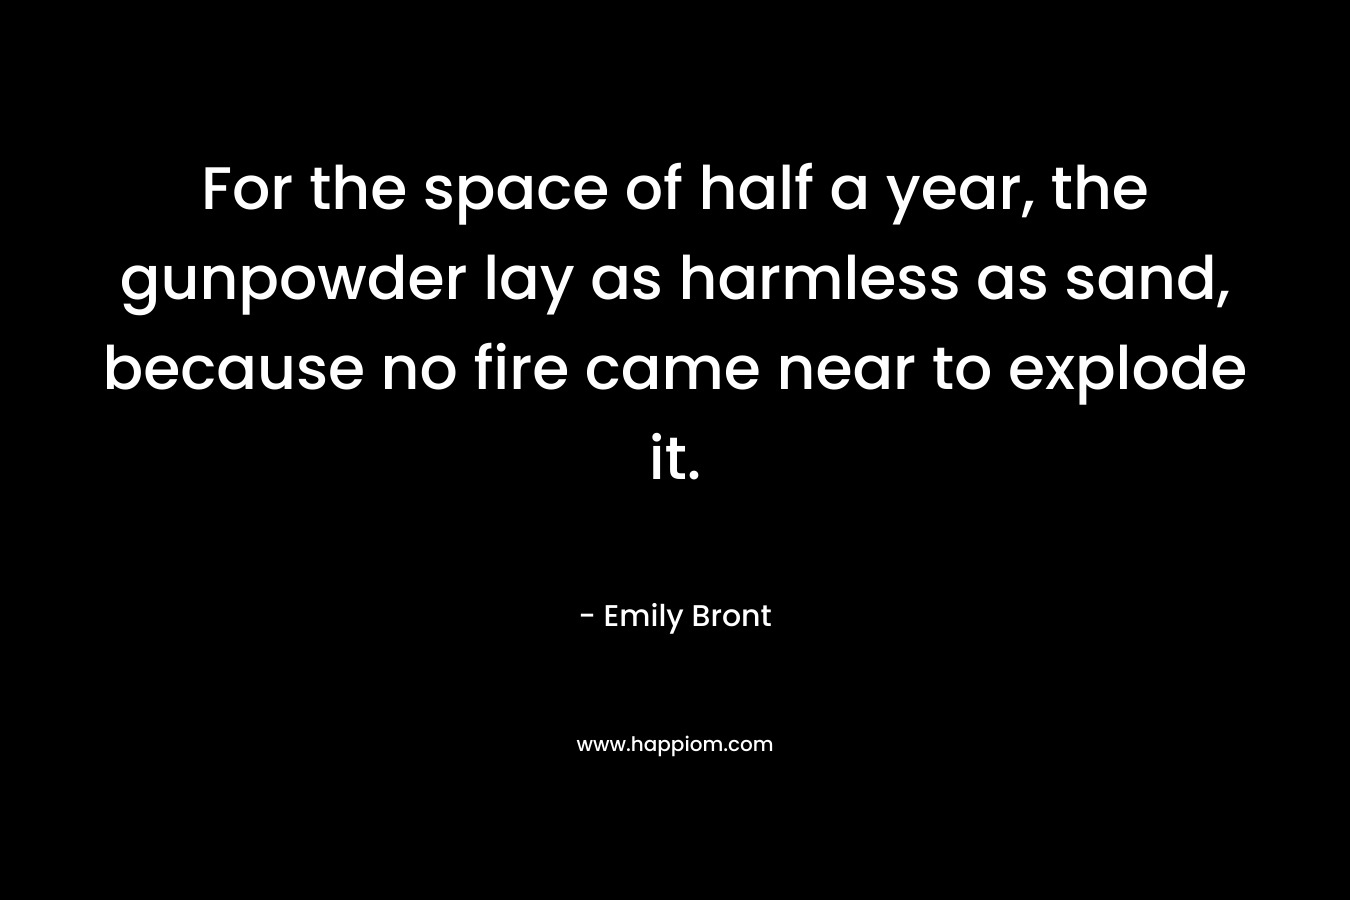 For the space of half a year, the gunpowder lay as harmless as sand, because no fire came near to explode it. – Emily Bront